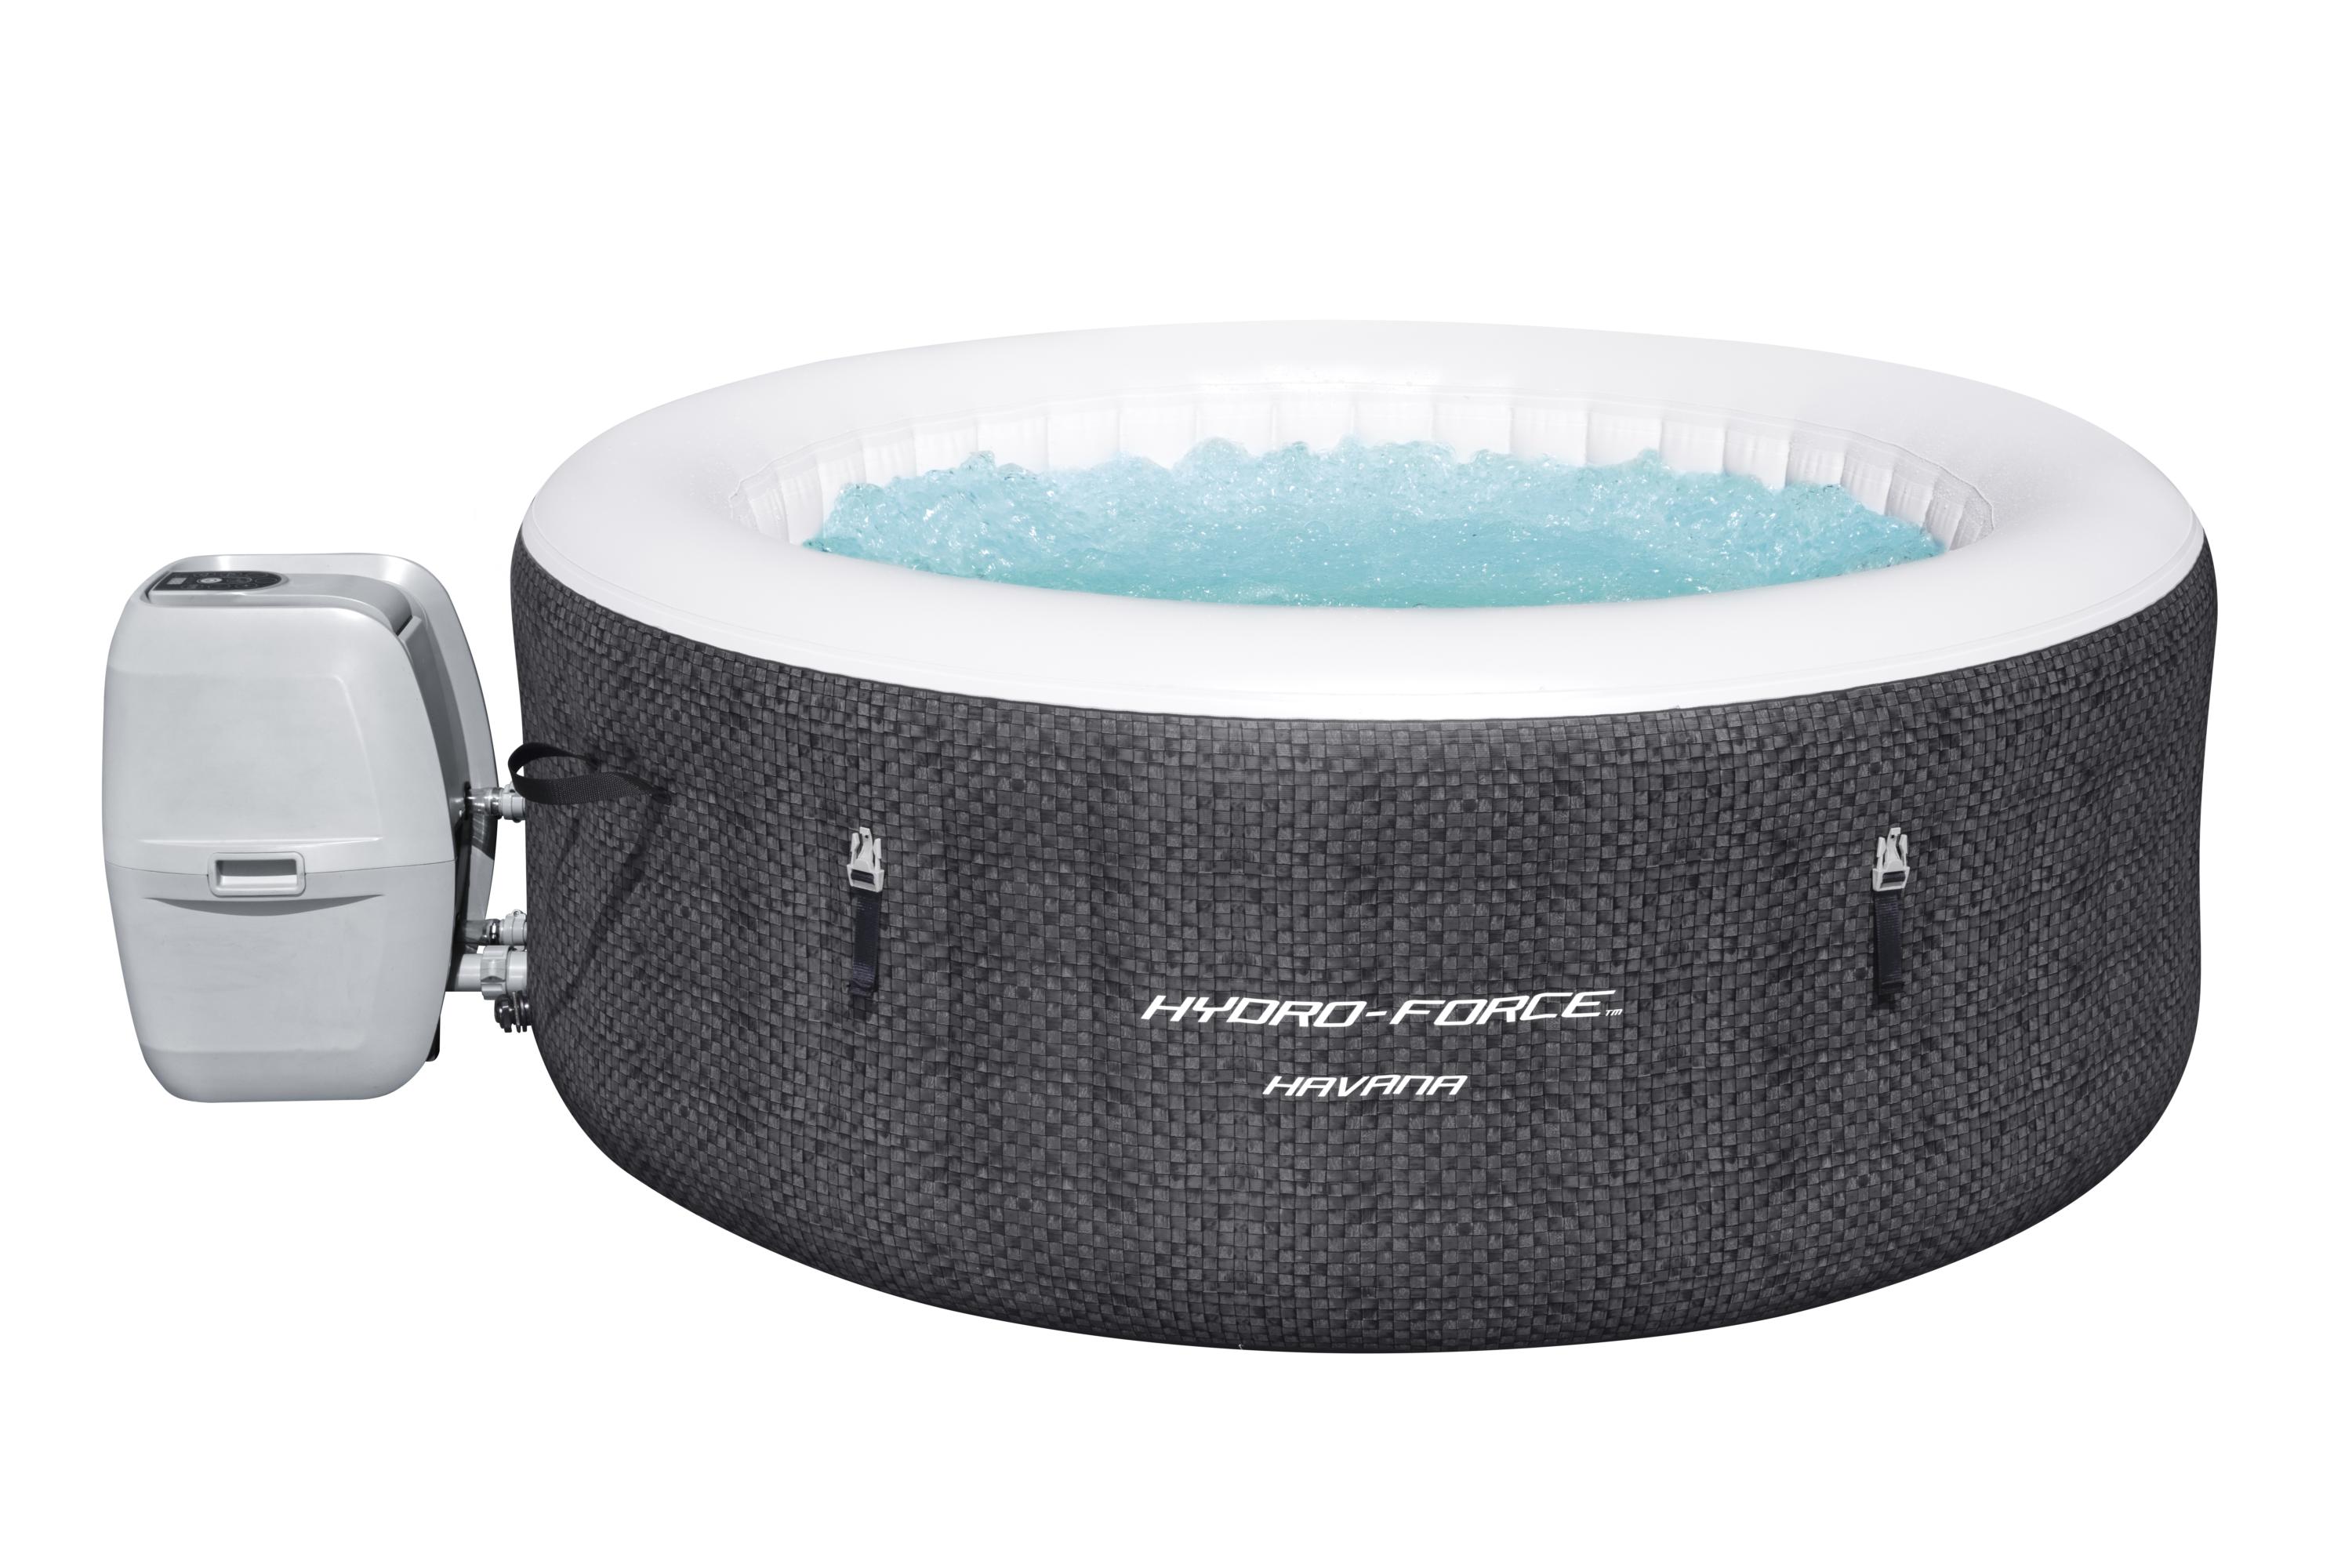 Hydro-Force Havana Inflatable Hot Tub Spa 2-4 person - image 1 of 9